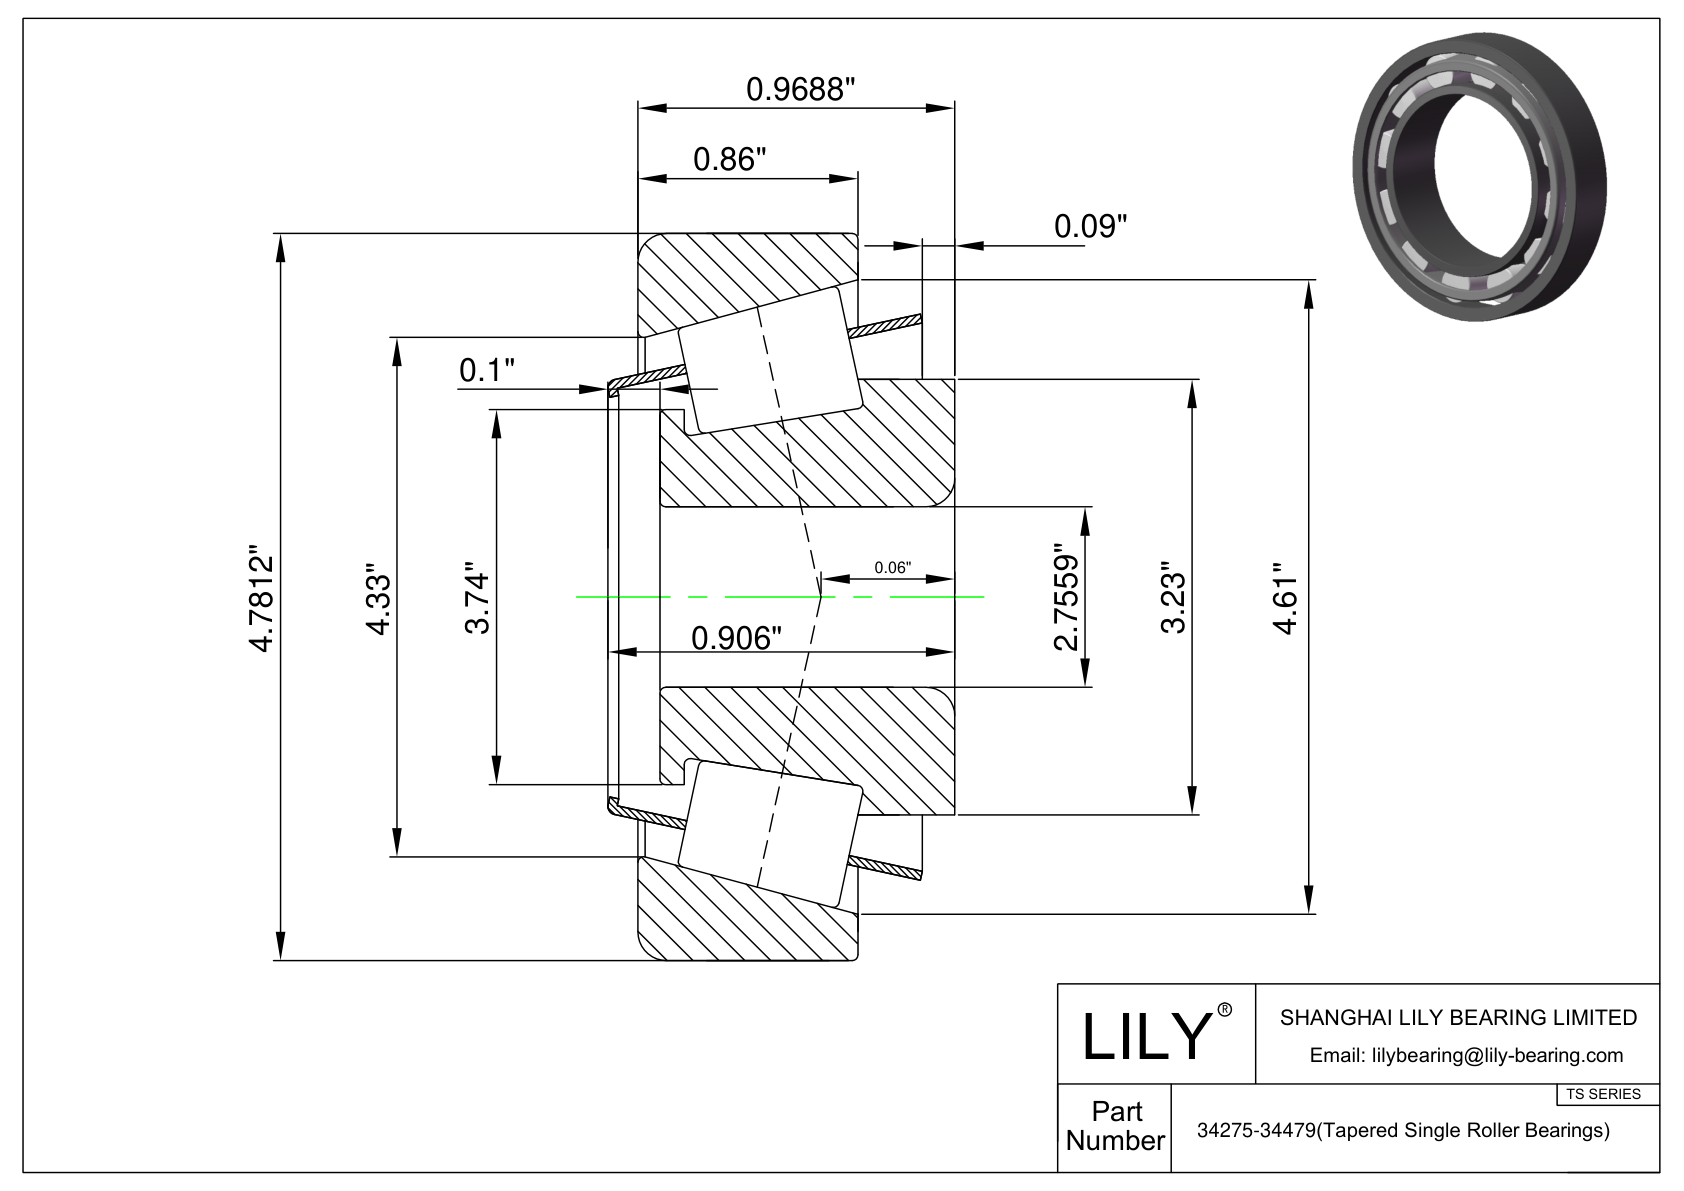 34275-34479 TS (Tapered Single Roller Bearings) (Imperial) cad drawing